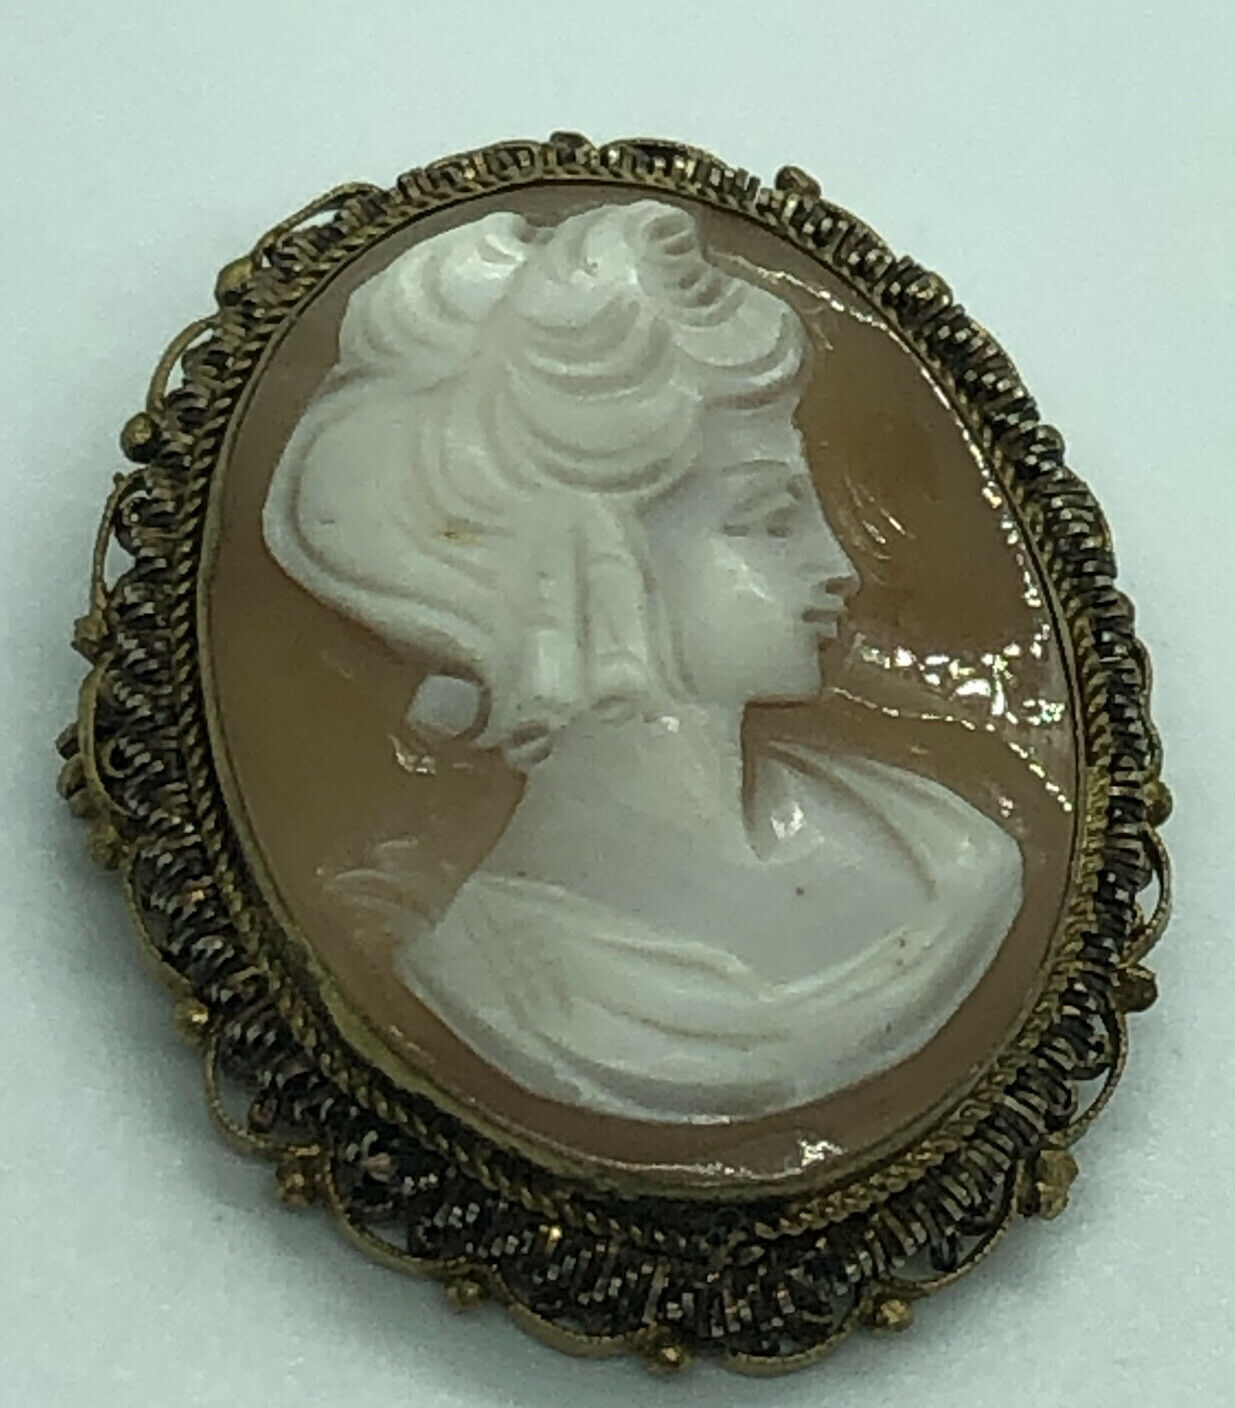 Vintage Cameo Brooch Pin Costume Jewelry Estate Find